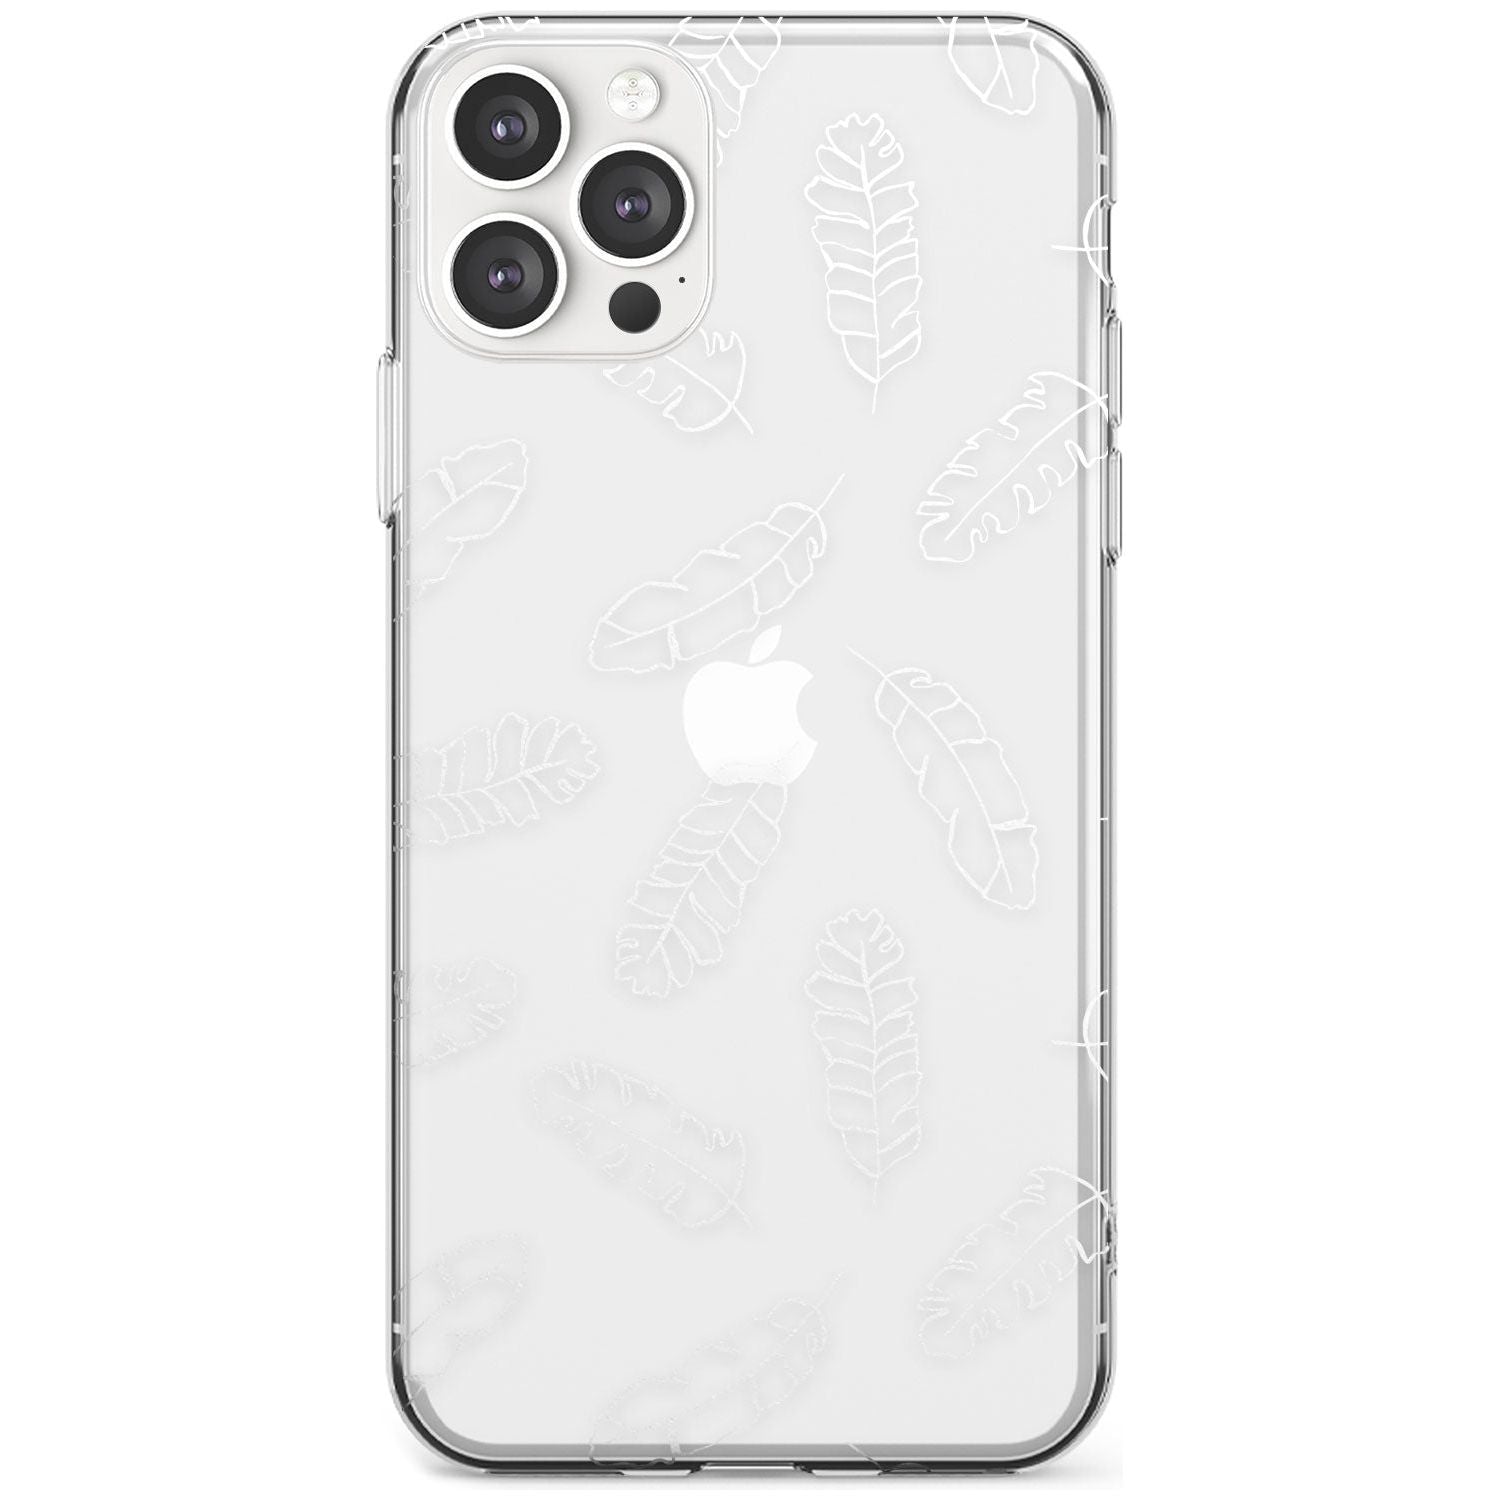 Clear Botanical Designs: Palm Leaves Black Impact Phone Case for iPhone 11 Pro Max